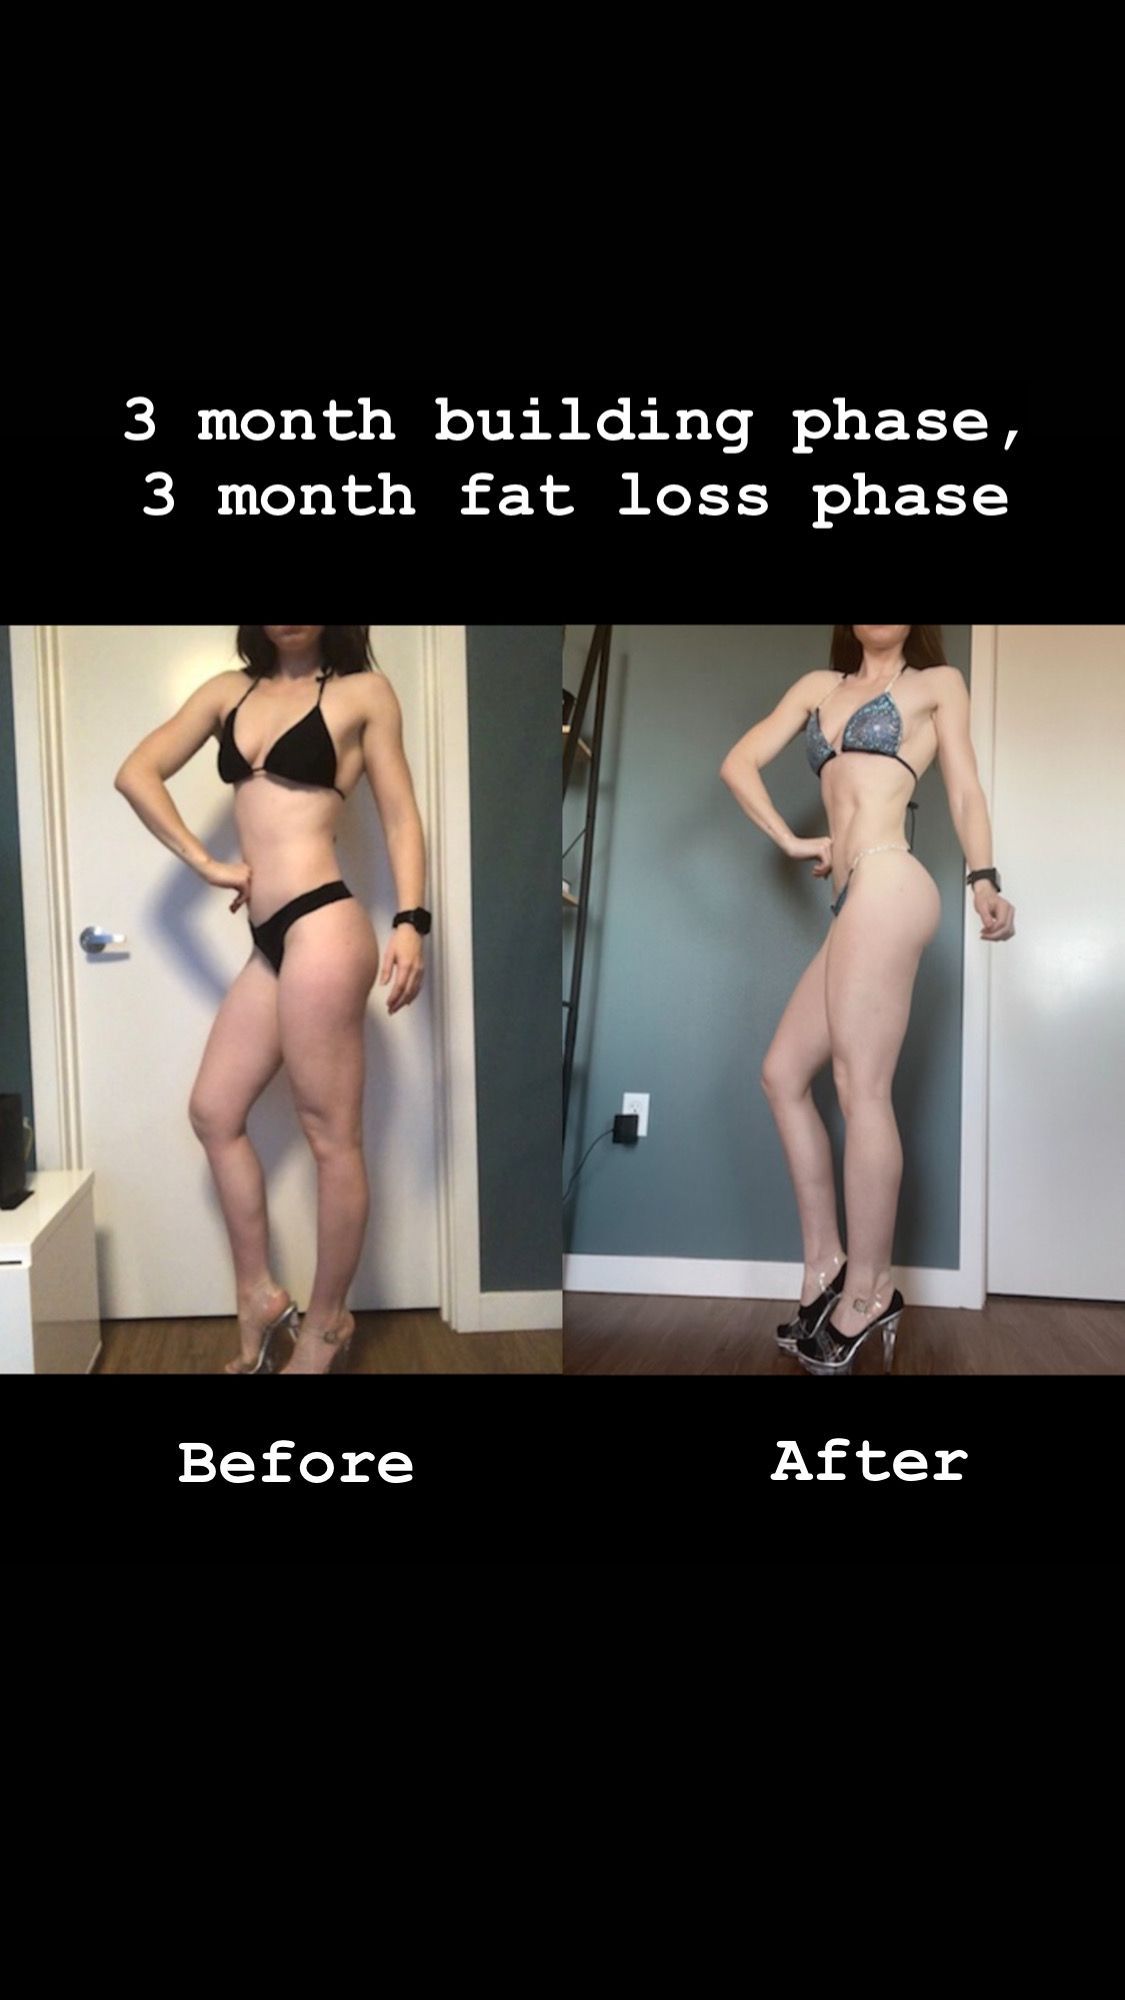 Gallery Photo of 6 month transformation 